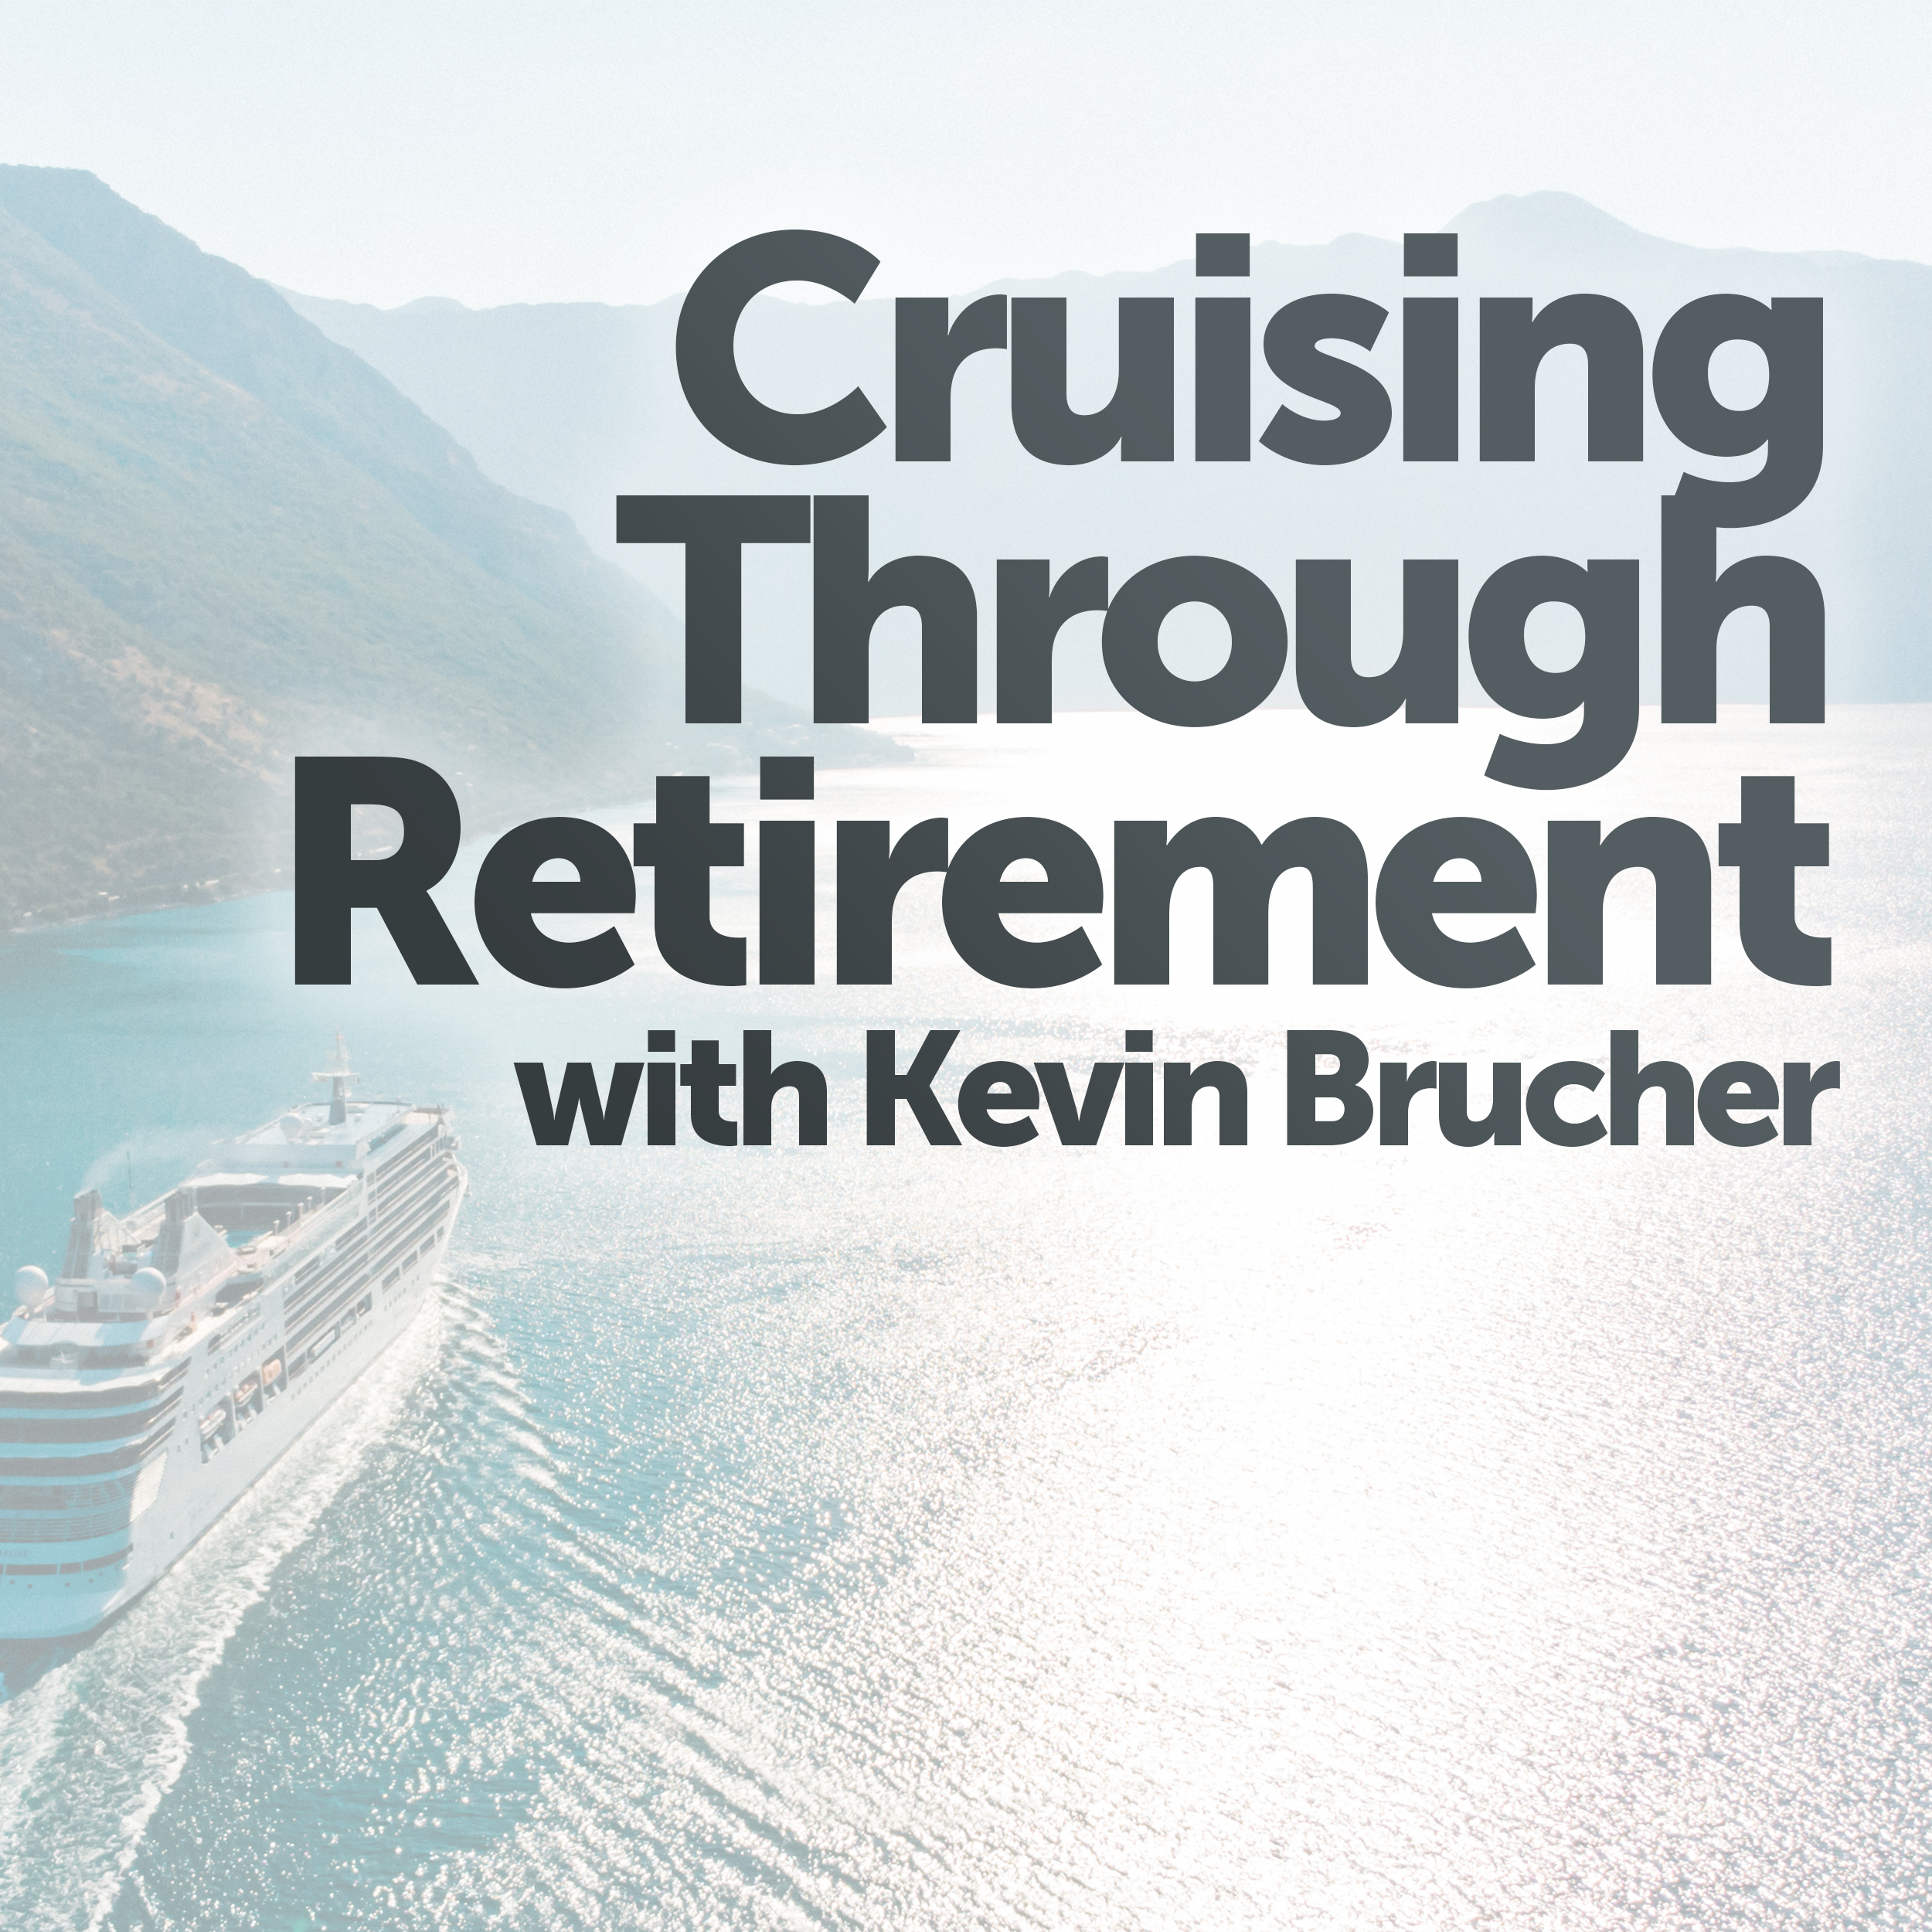 Ep 106 Cruising Through Retirement This week Kevin Brucher addresses the impact and financial factors that we all have had to adjust to in the post pandemic